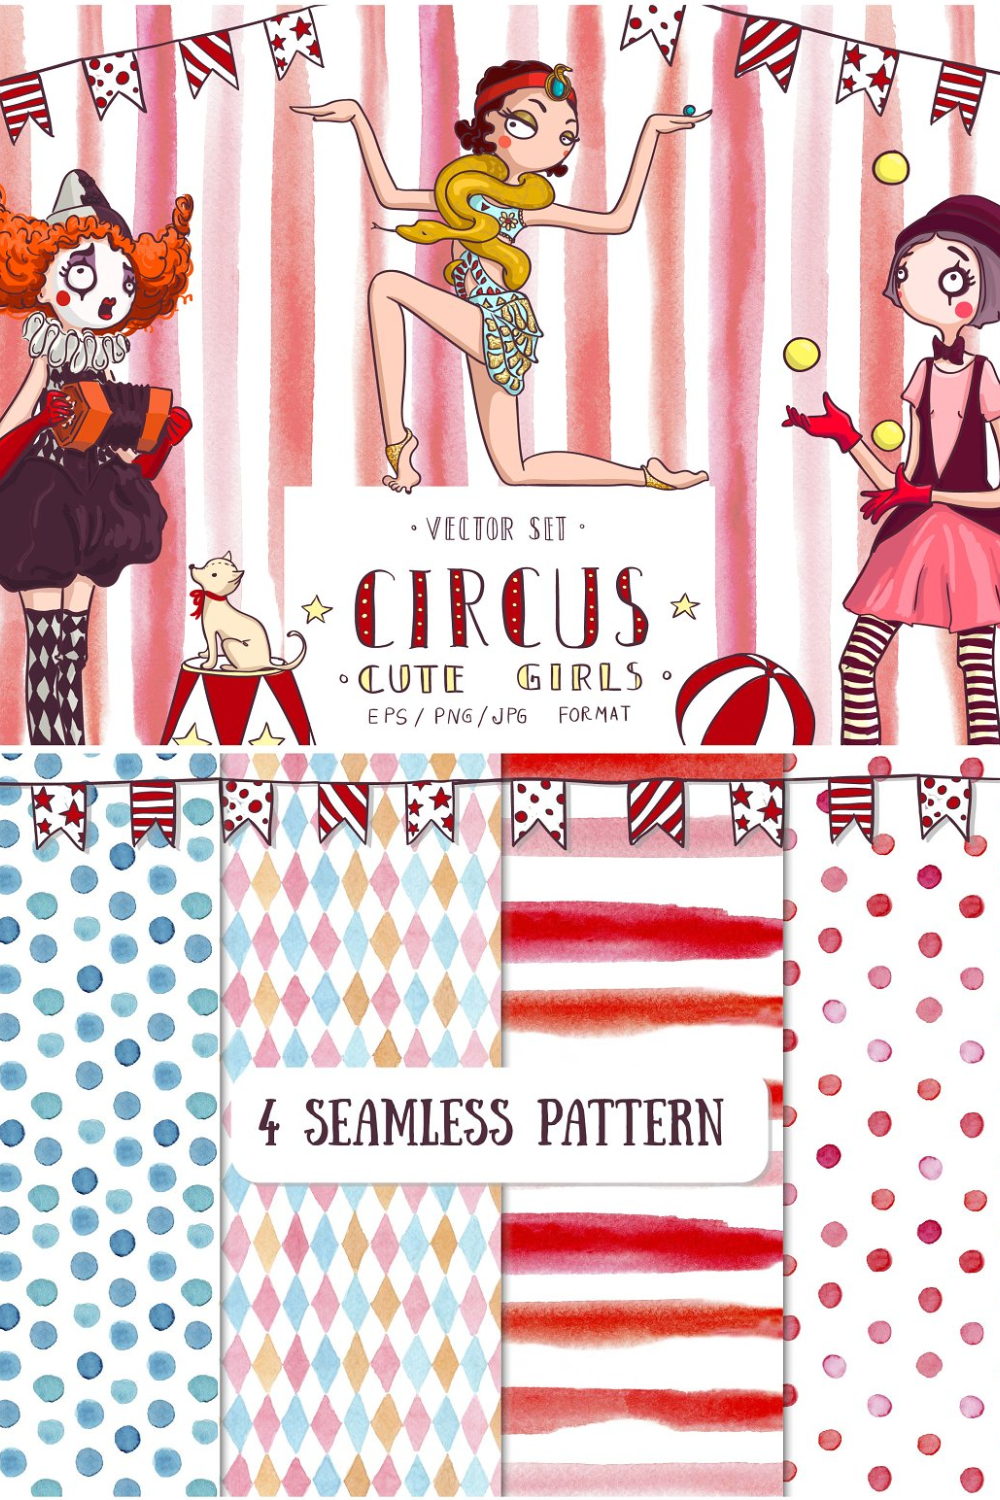 Circus Cute Girls Collection - Pinterest.